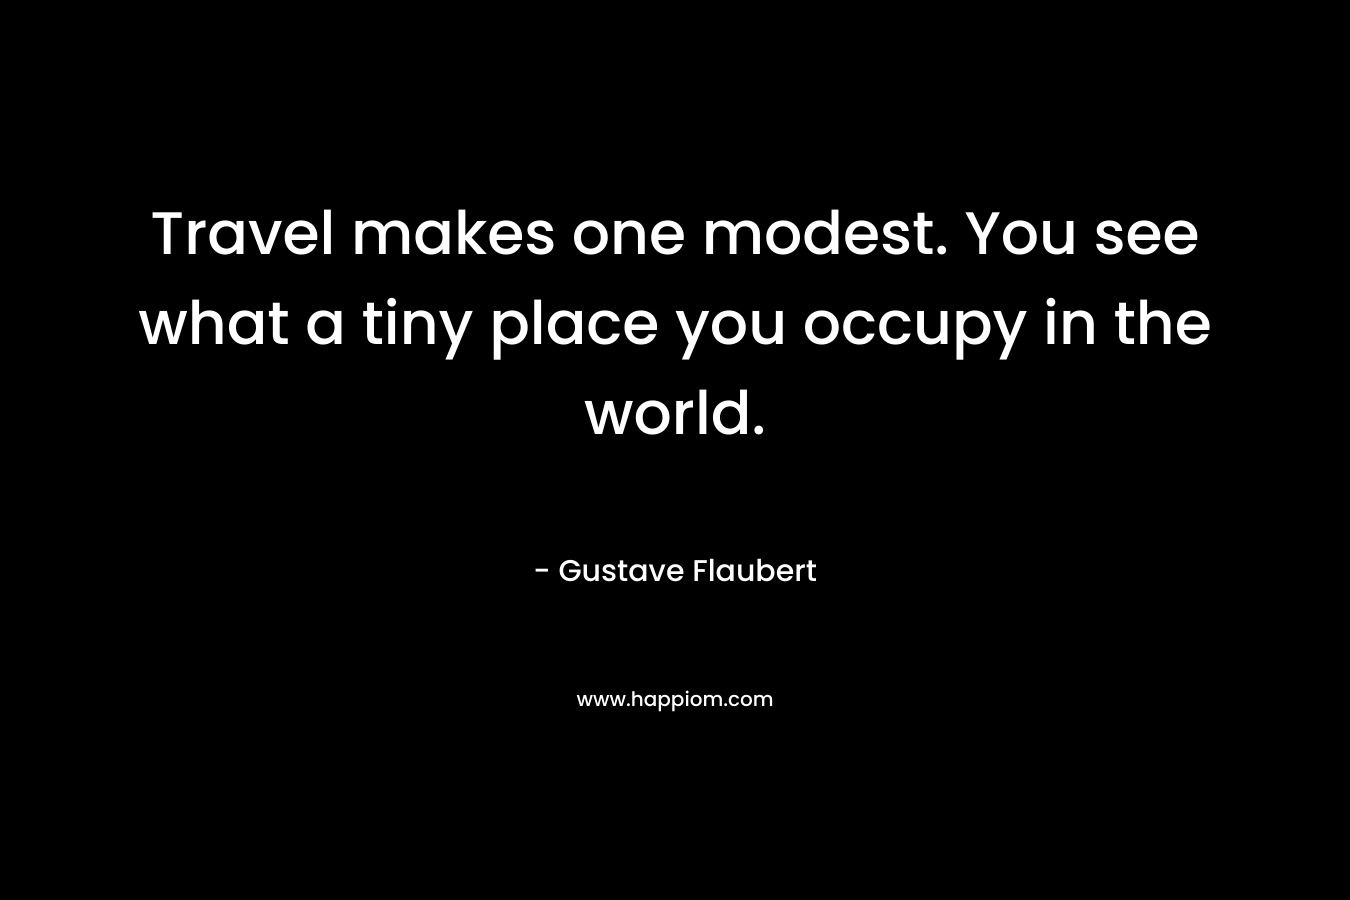 Travel makes one modest. You see what a tiny place you occupy in the world. – Gustave Flaubert